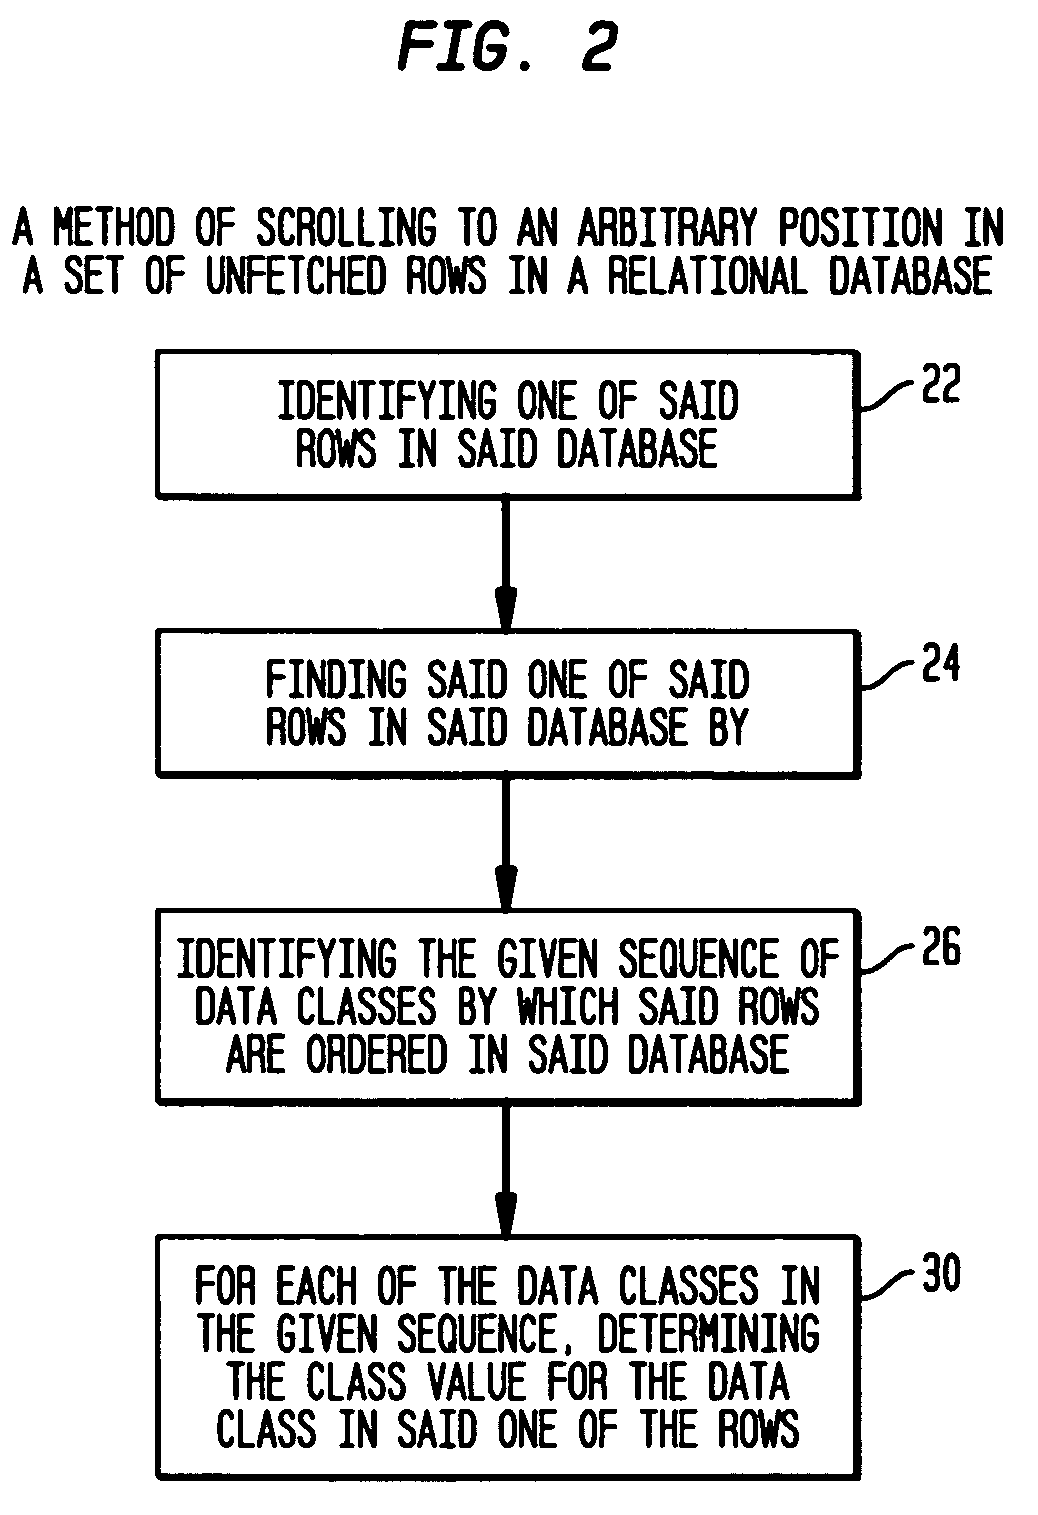 Advanced scrolling for relational database applications